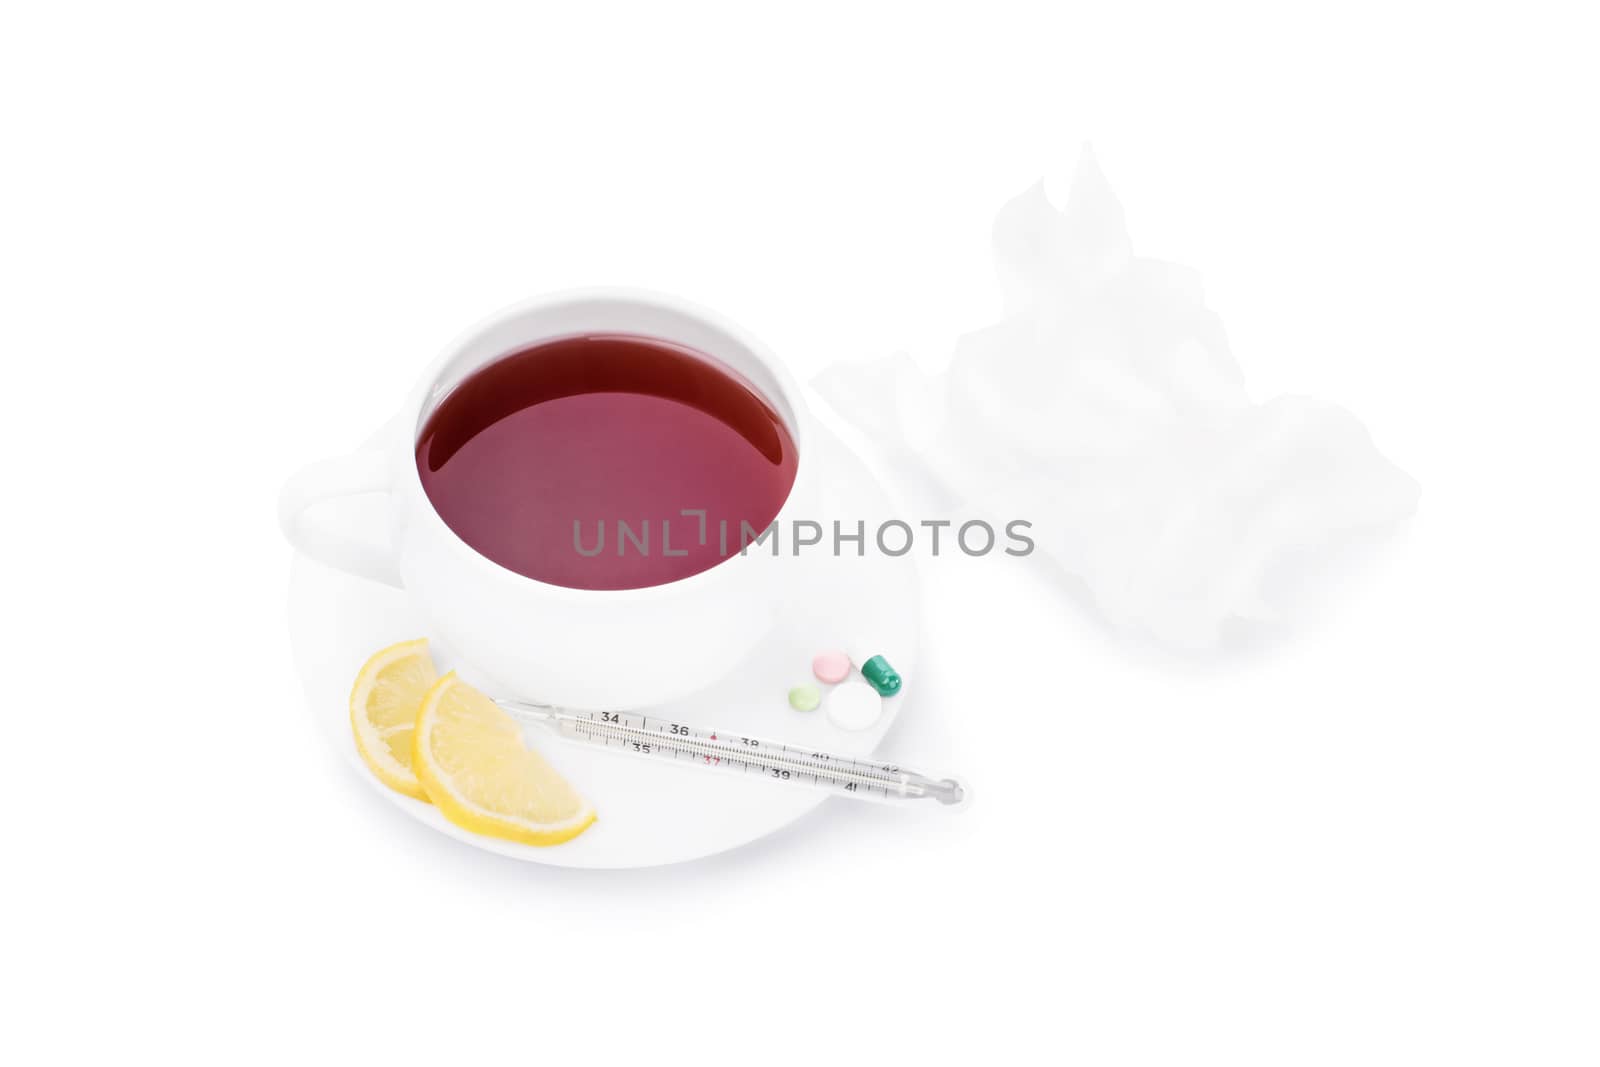 Cup of tea with pills, lemon slices, a thermometer and wrinkled tissue paper, isolated on white background.
